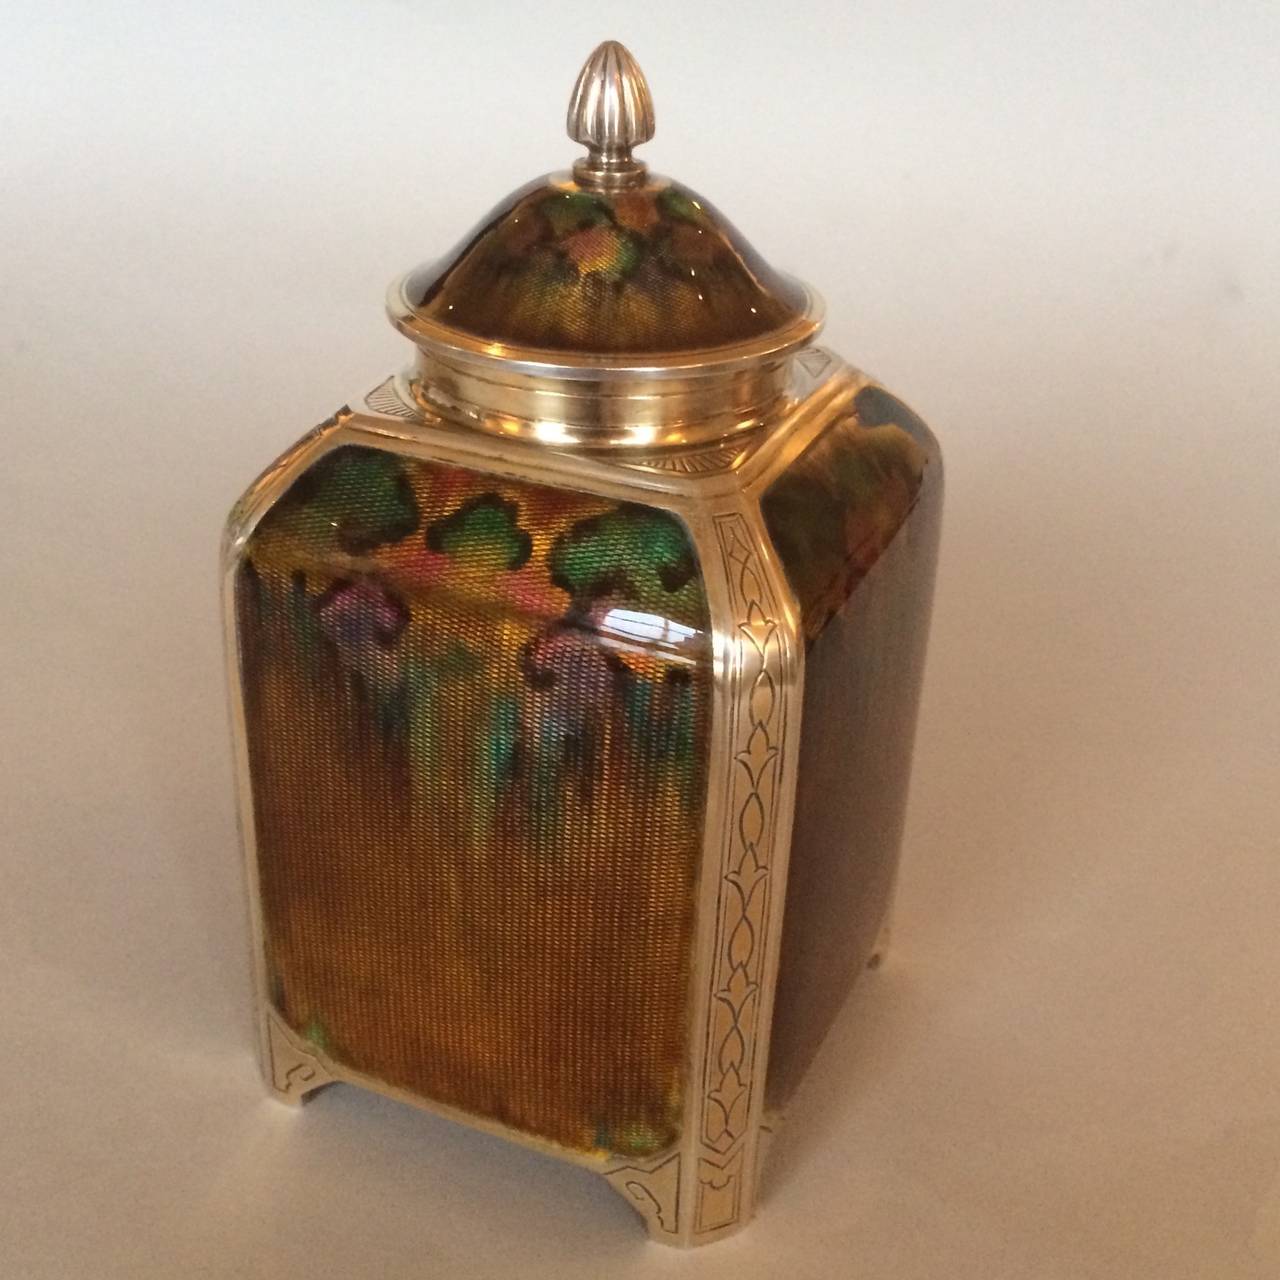 Guilloche and vermeil tea caddy by David Andersen. Truly a rare piece.

The David Andersen Company has been in existence since 1876 and most known for its fine enamel jewelry. They also made, in limited amounts, silver and enamel hollow ware.